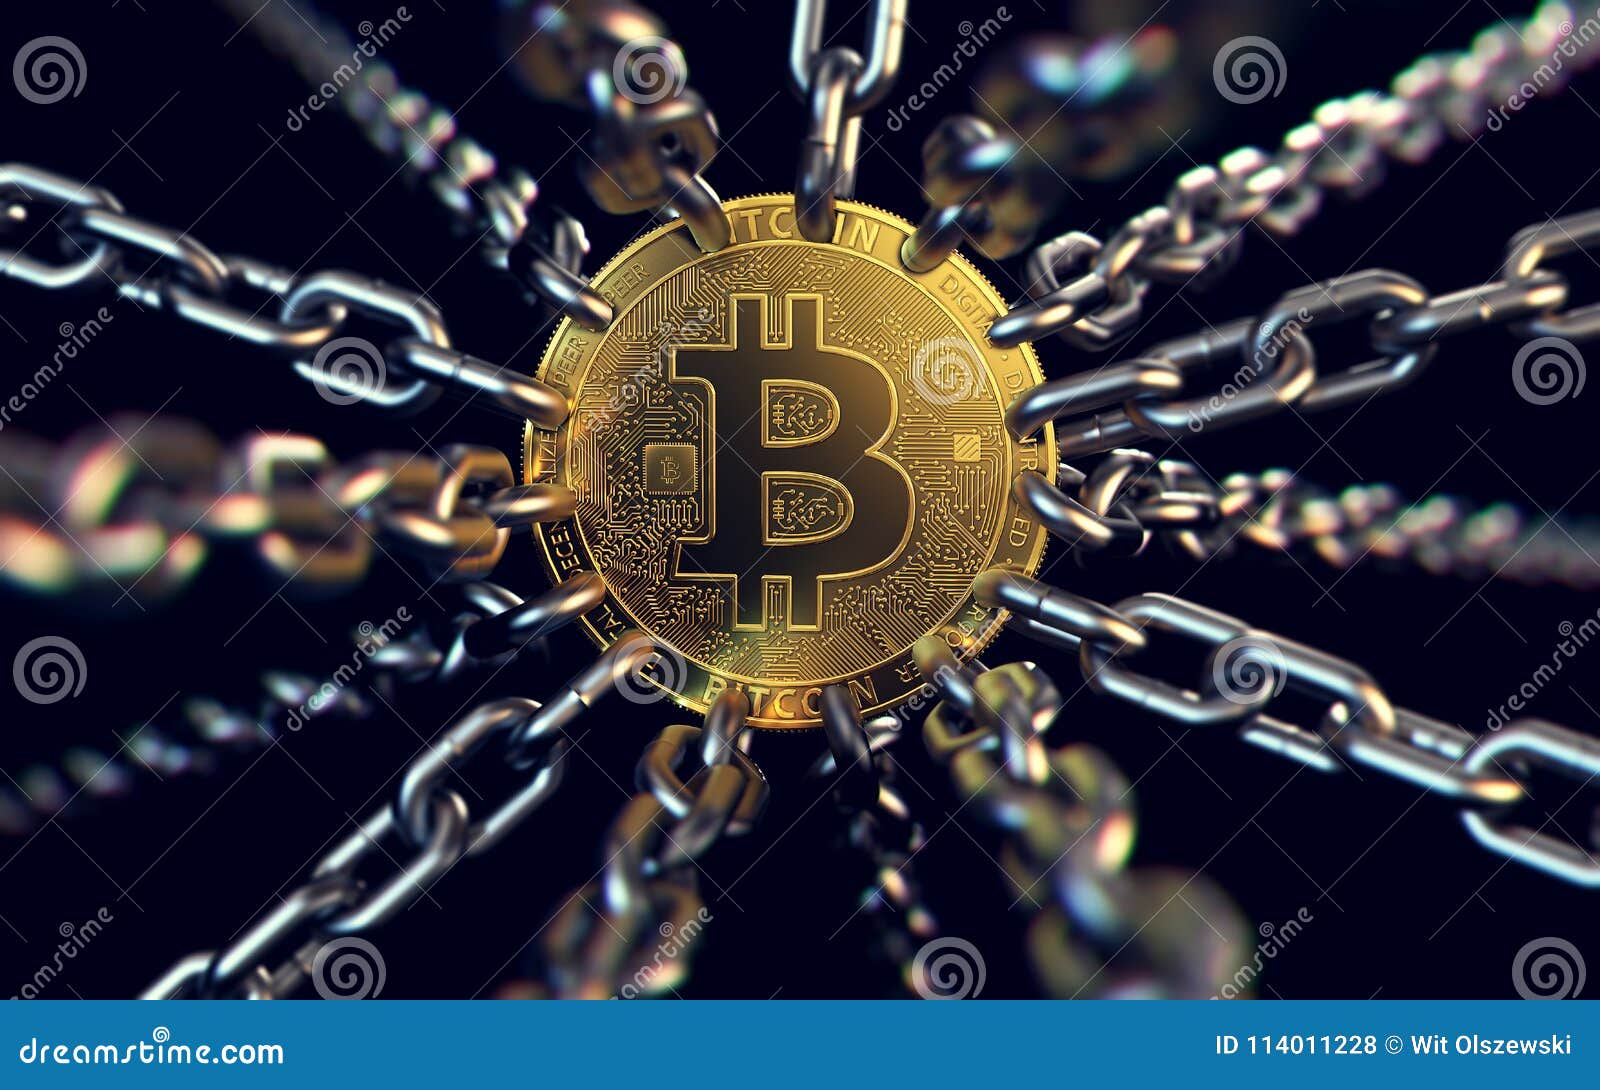 bitcoin trapped with chains - as governments try to ban it. 3d rendering